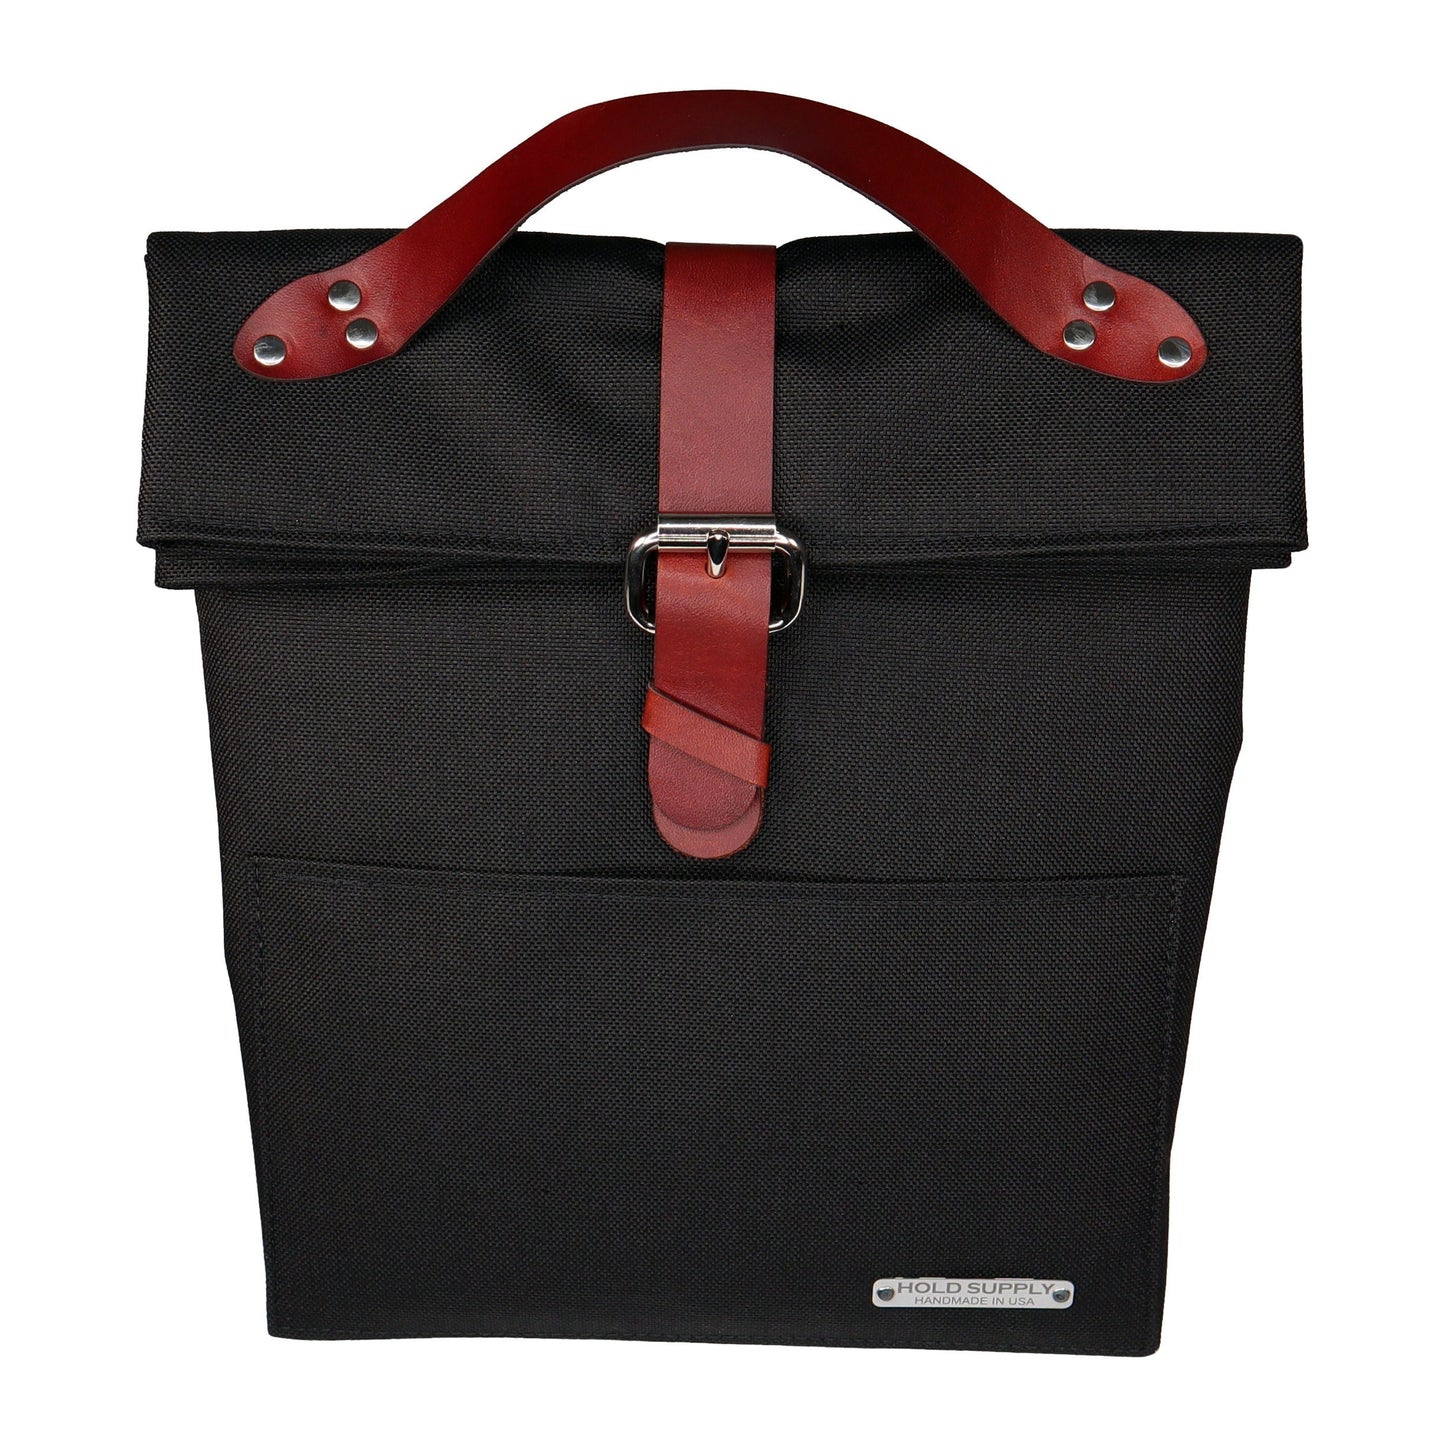 Black Canvas & Leather Fold Top Lunch Bag